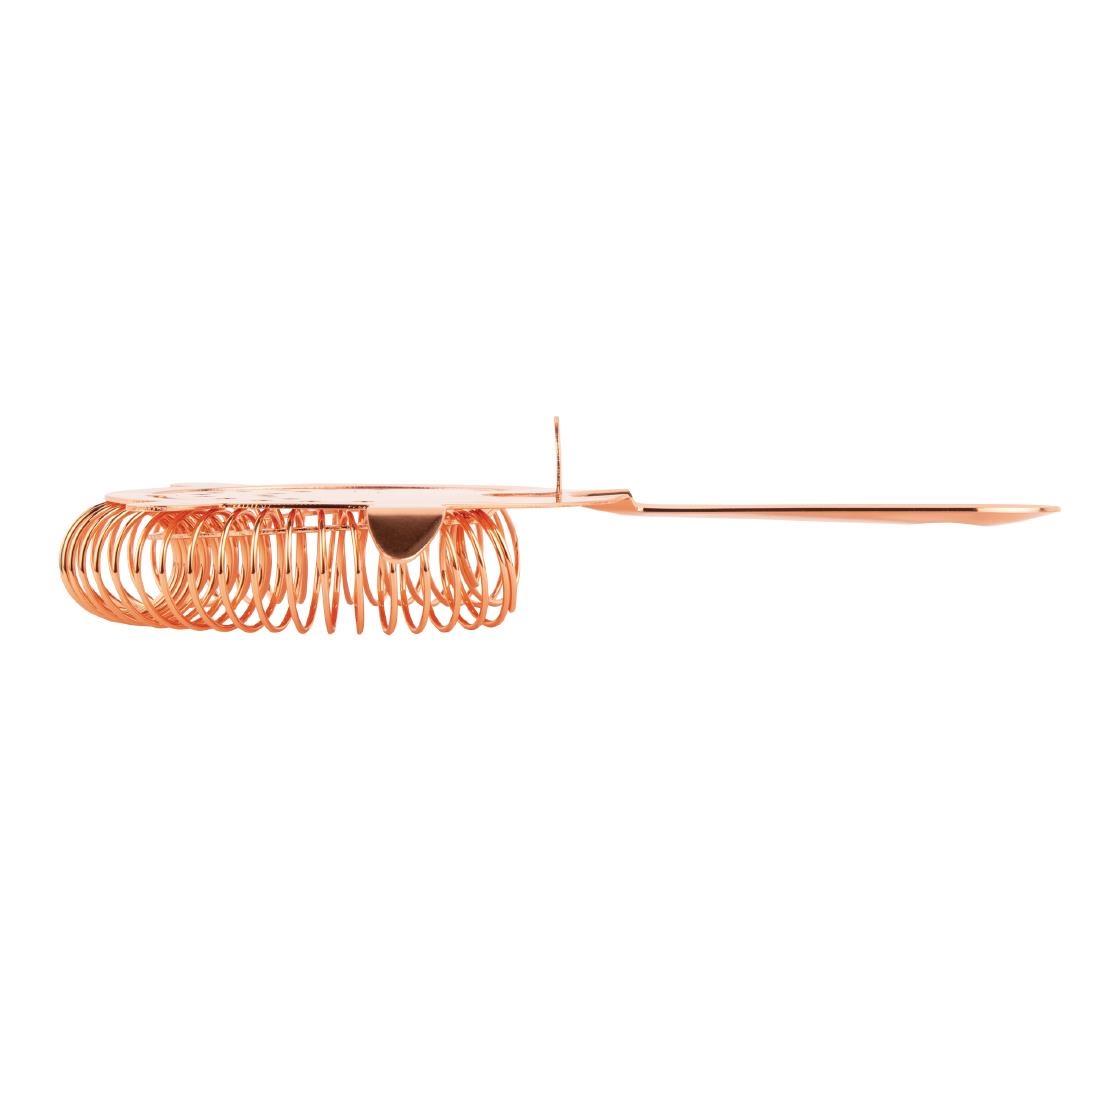 Olympia Hawthorne Strainer 4 Prong Copper - DR600  - 2